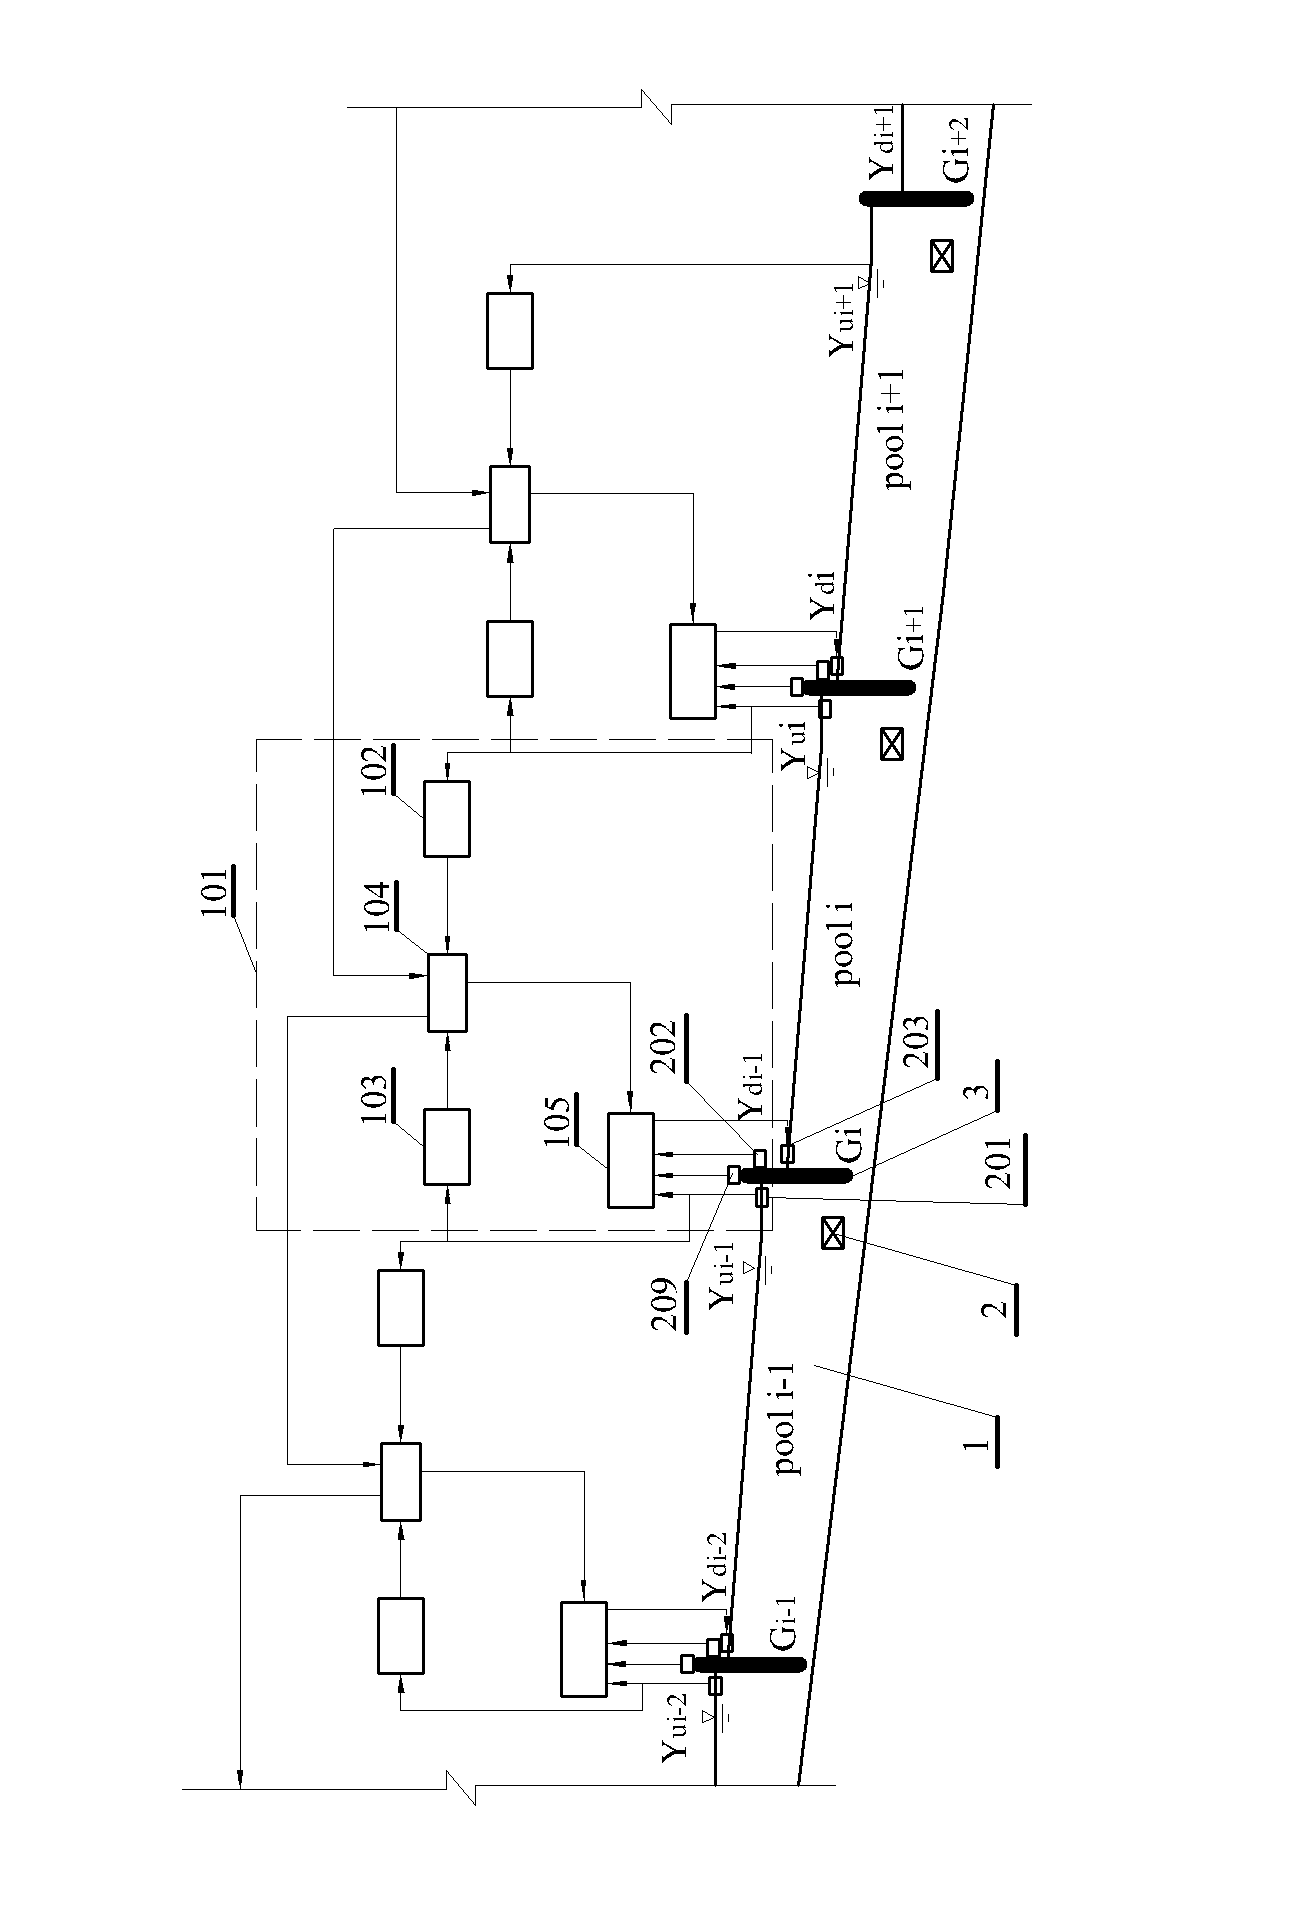 Method and device for automatically controlling water levels of multiple channel sections